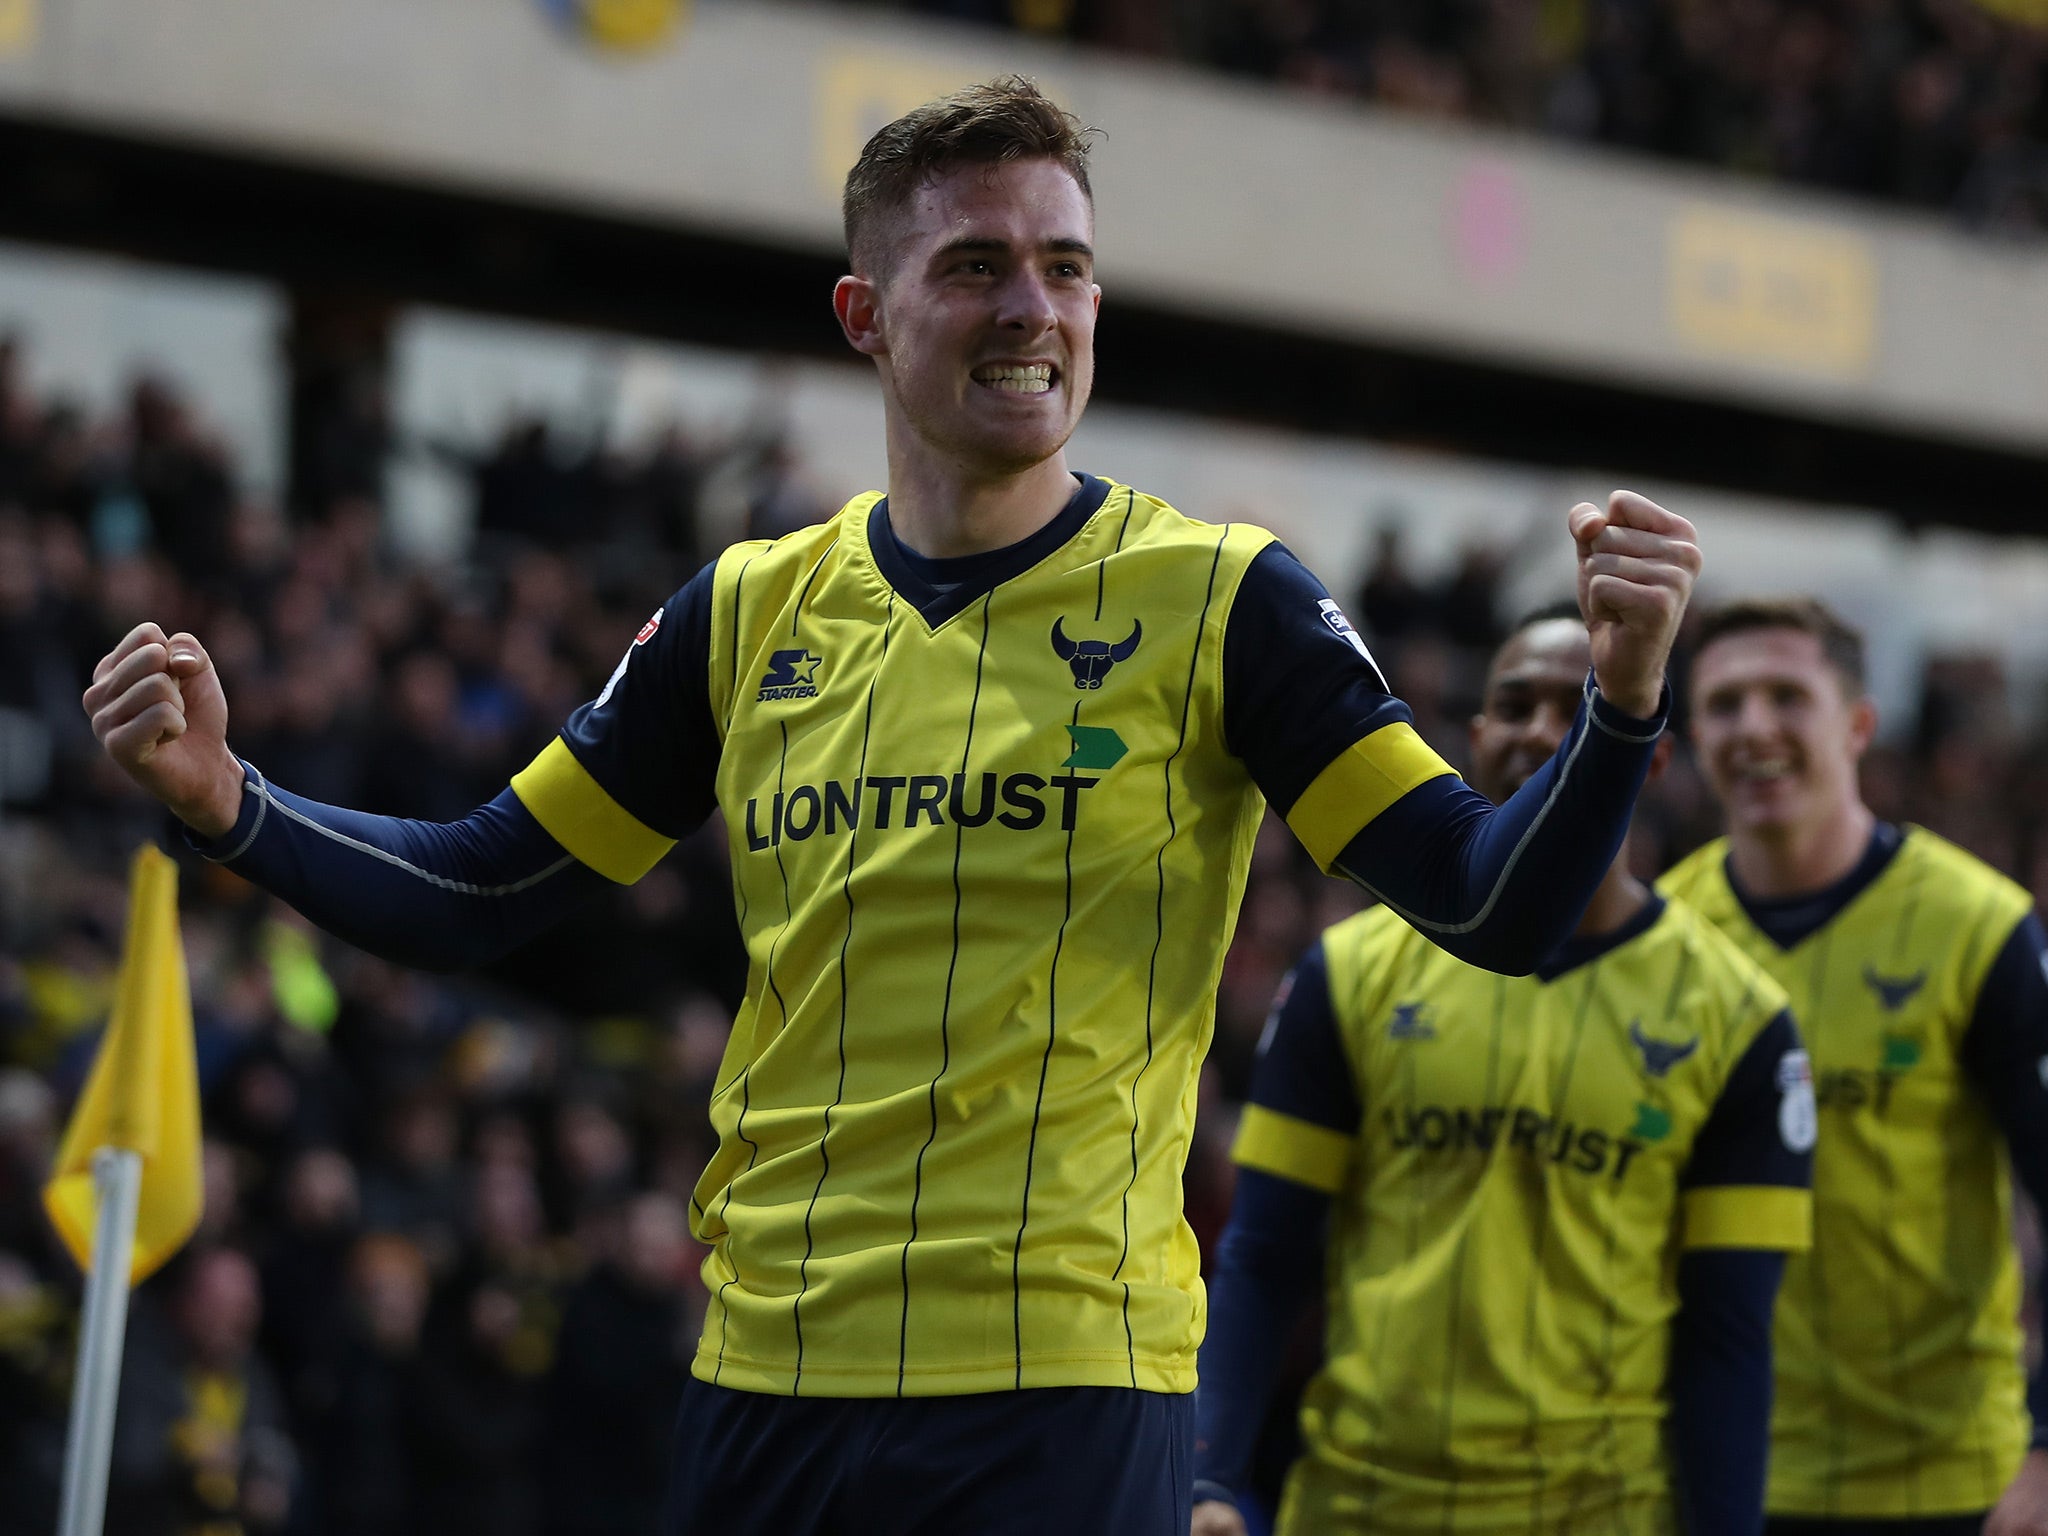 Toni Martinez came off the bench to round off Oxford's win